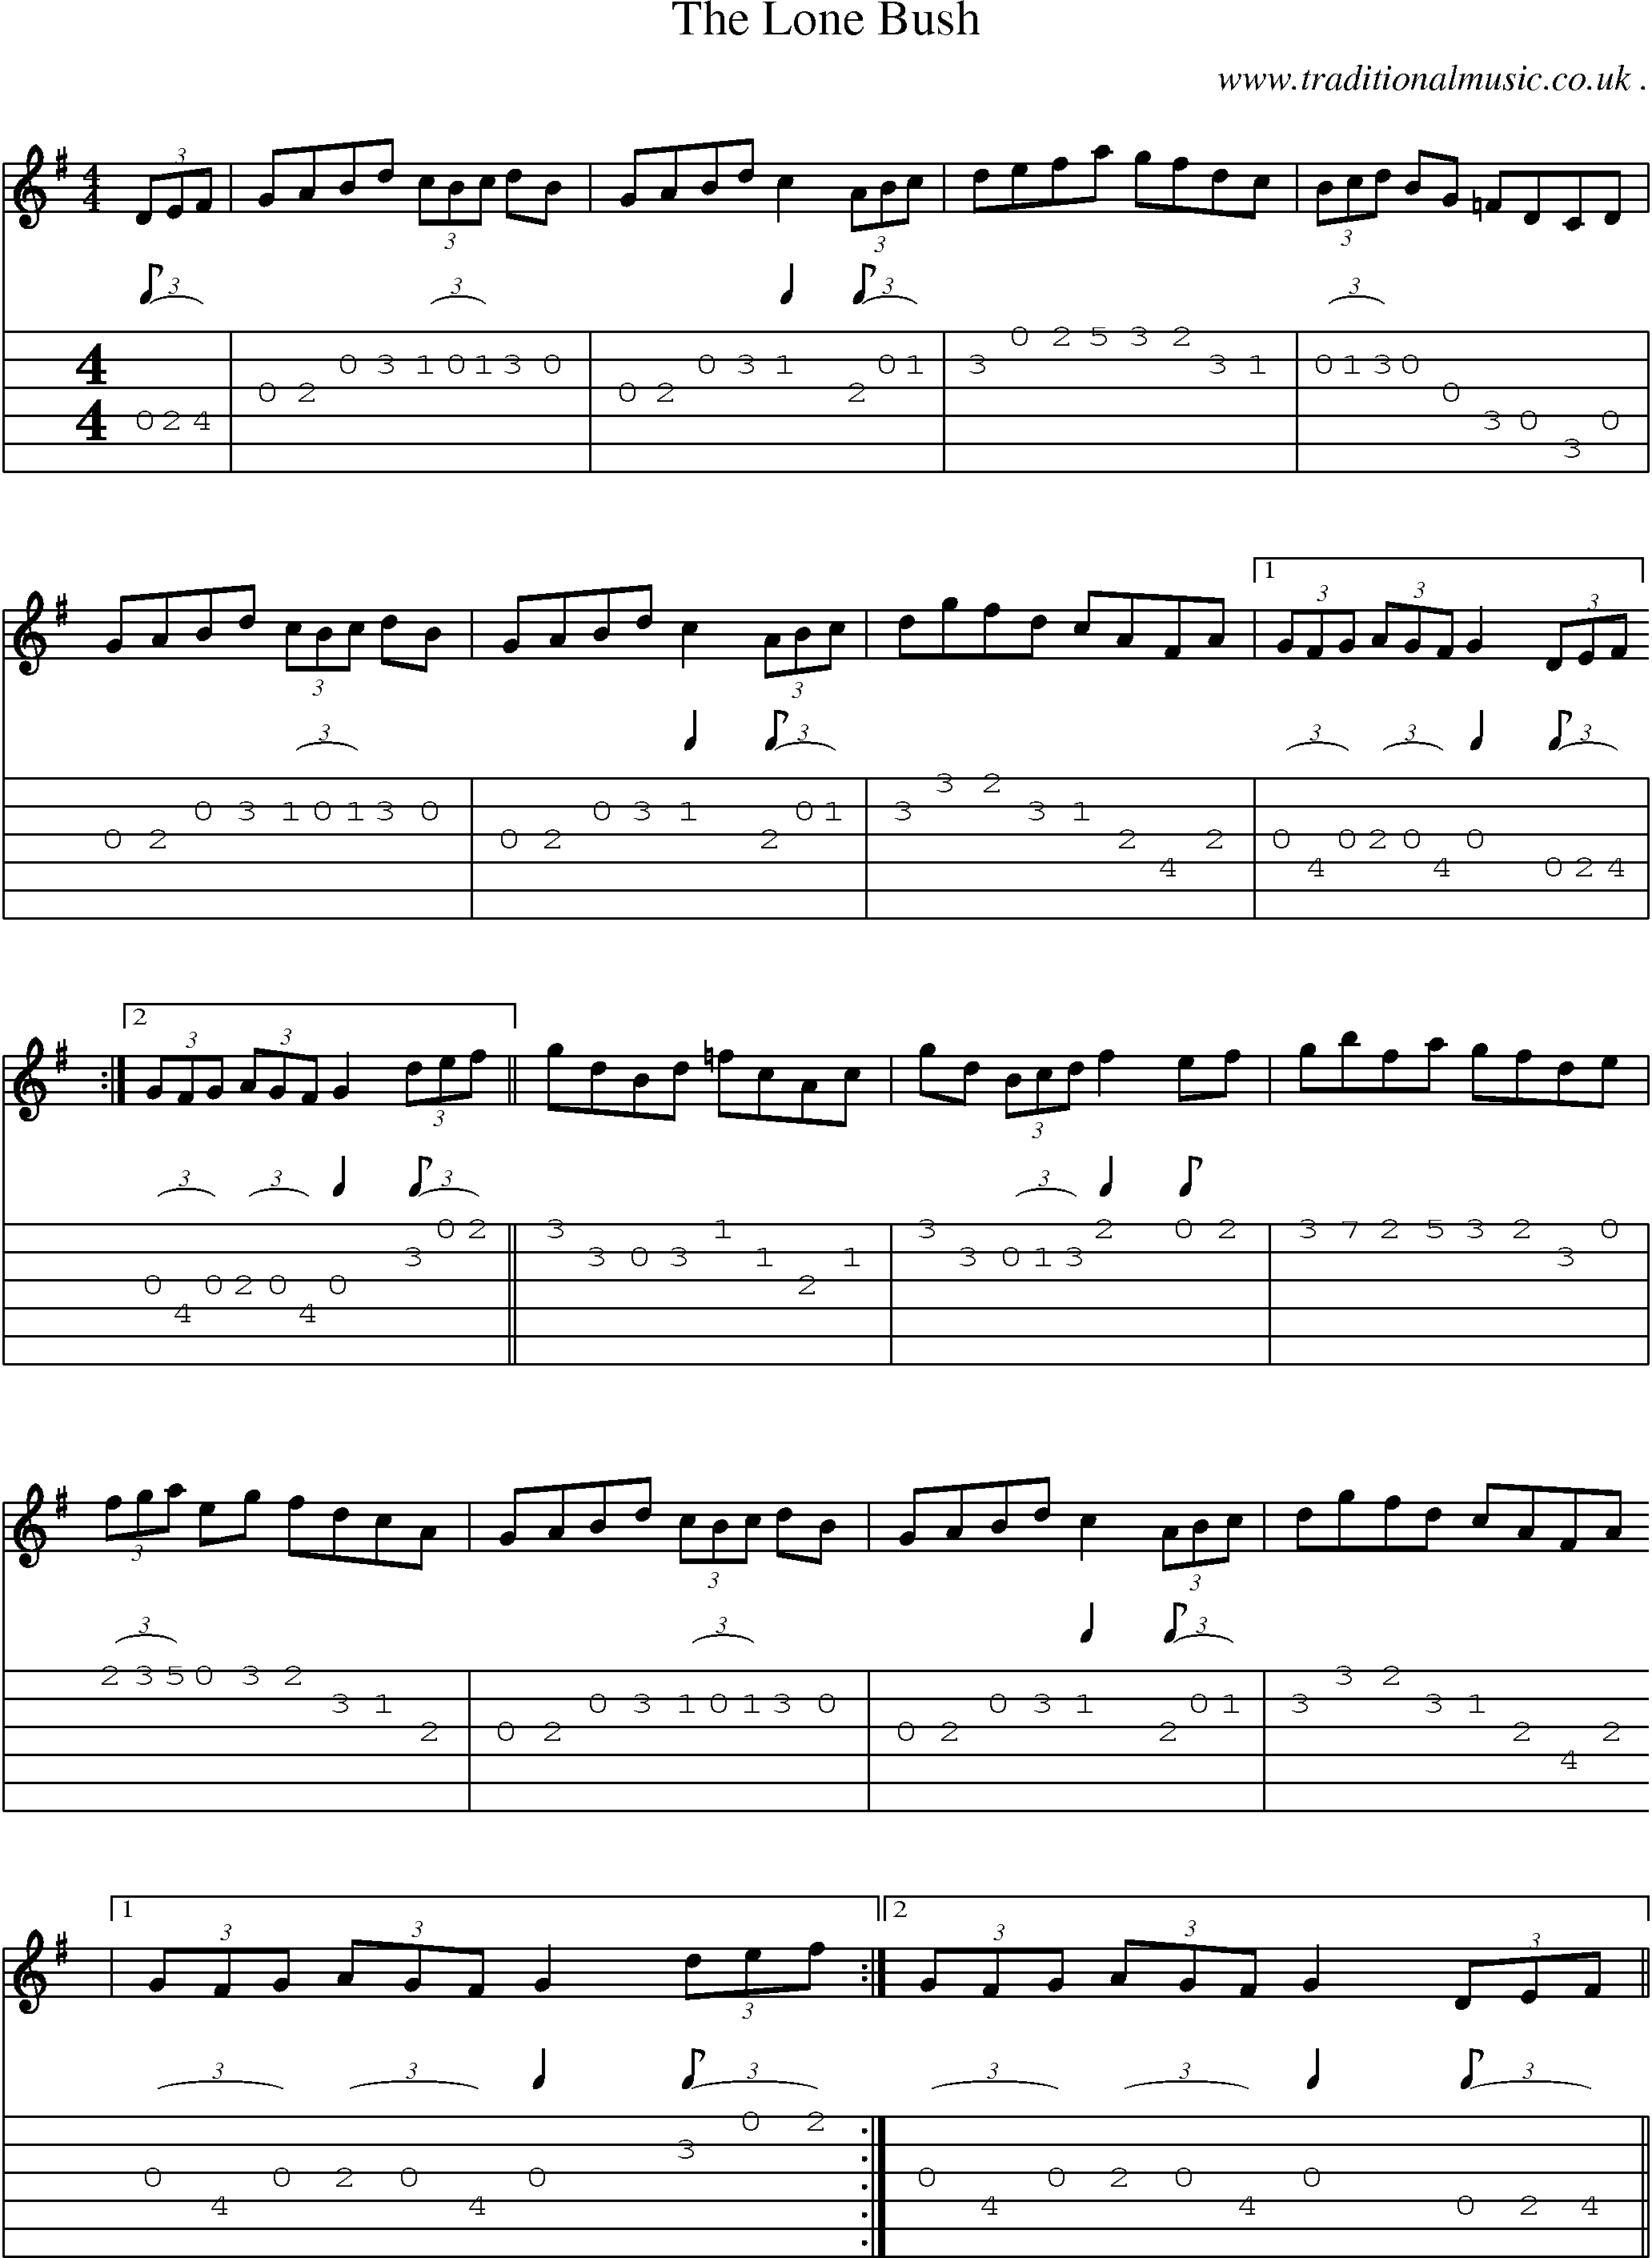 Sheet-Music and Guitar Tabs for The Lone Bush